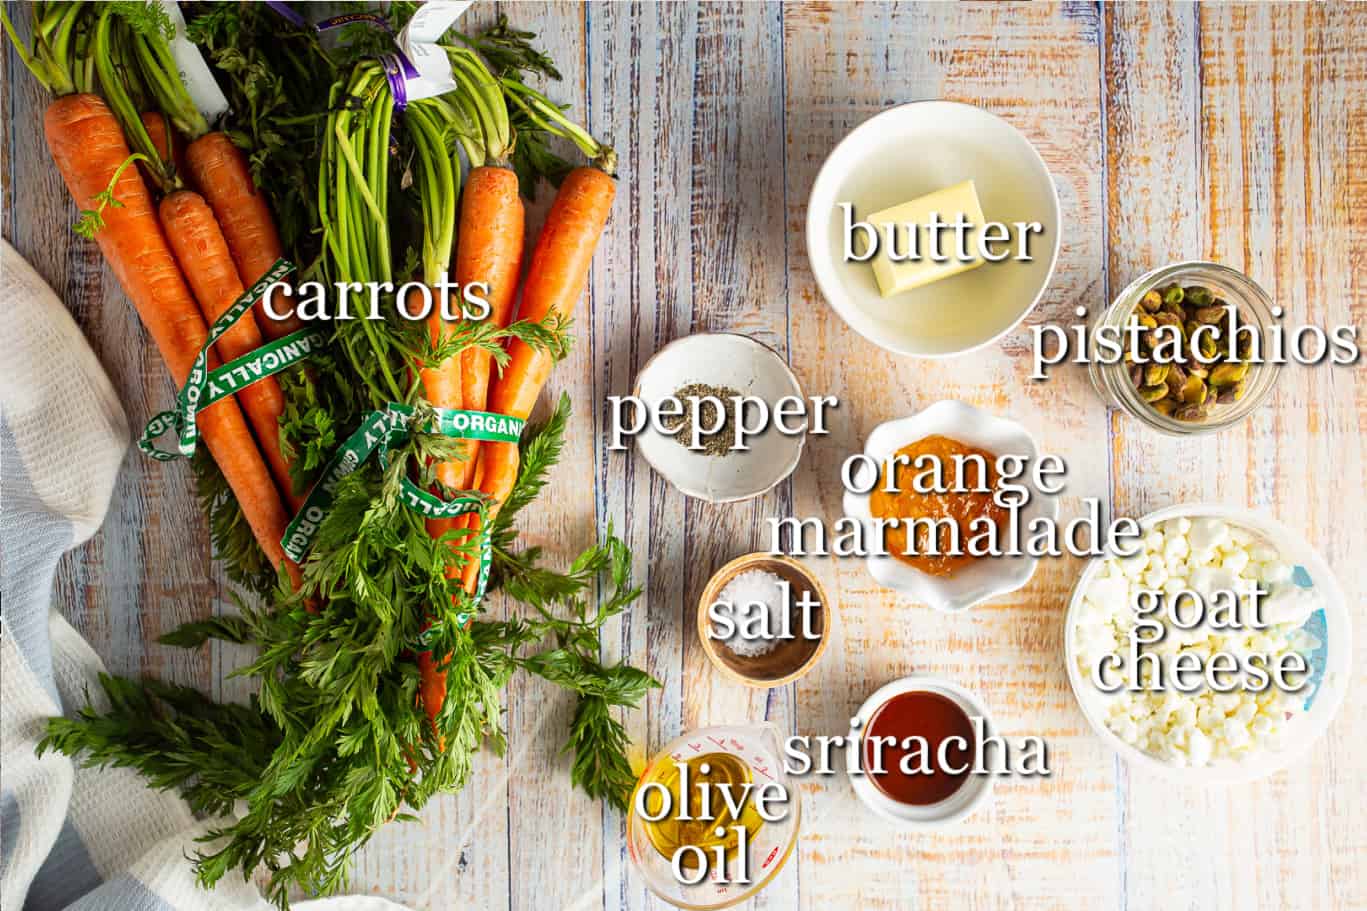 Ingredients for making glazed carrots, with text labels.